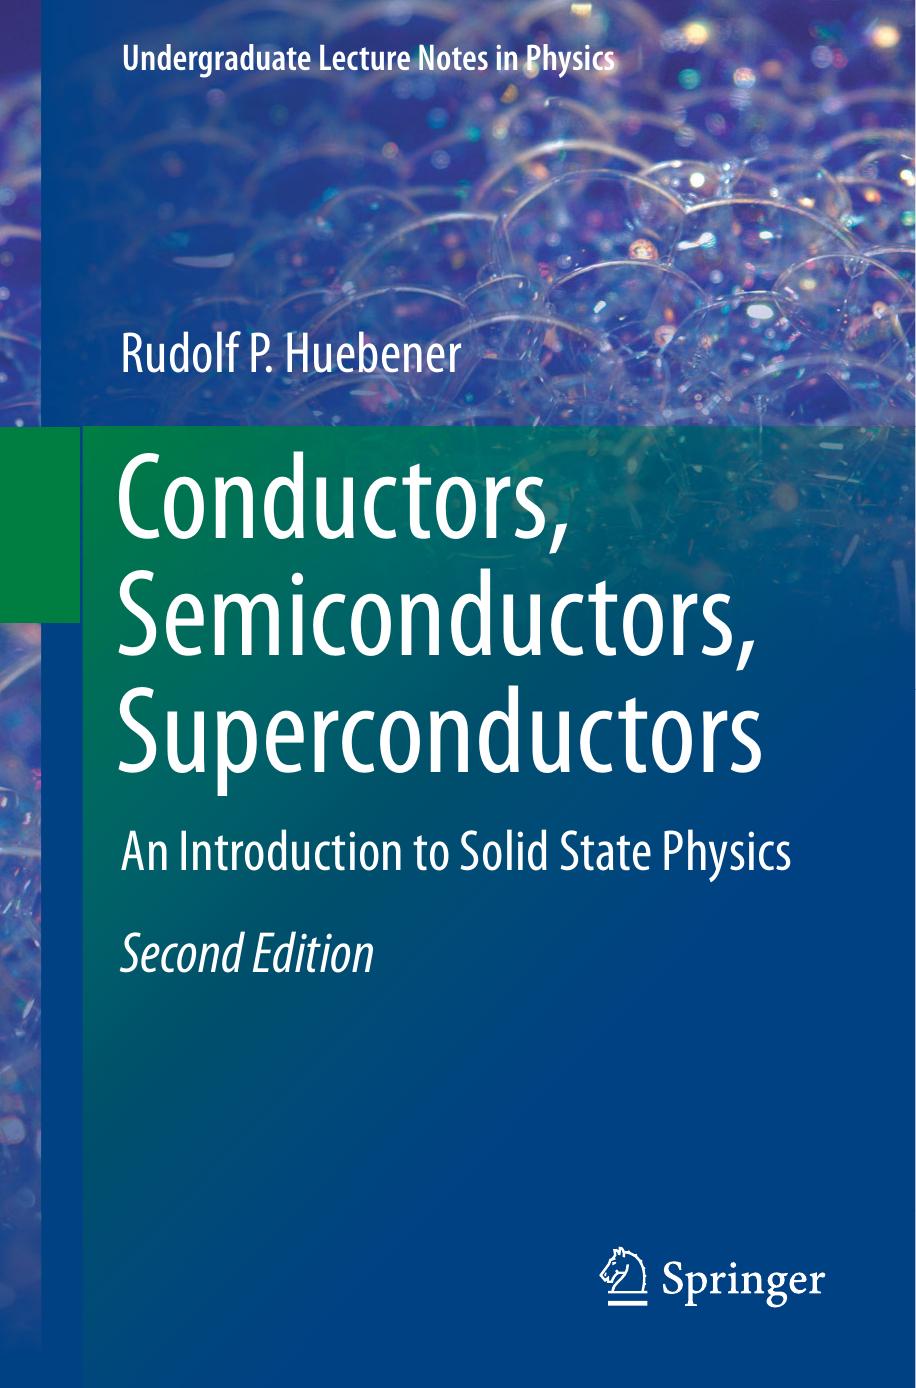 Conductors, Semiconductors, Superconductors  An Introduction to Solid State Physics 2015,2016 ( PDFDrive.com )